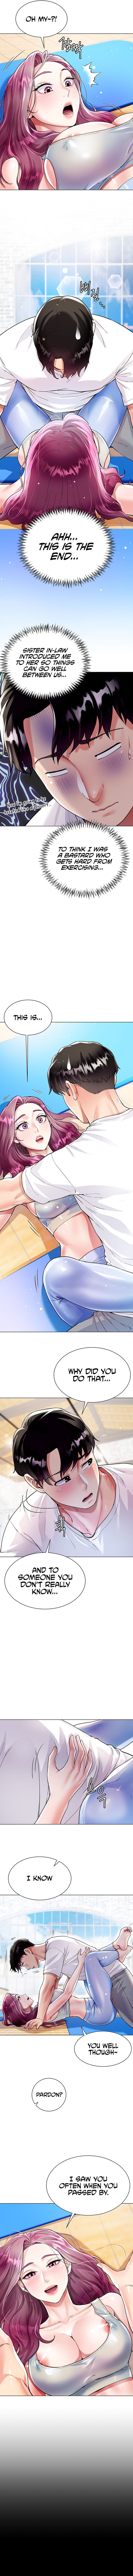 my-sister-in-laws-skirt-chap-3-5